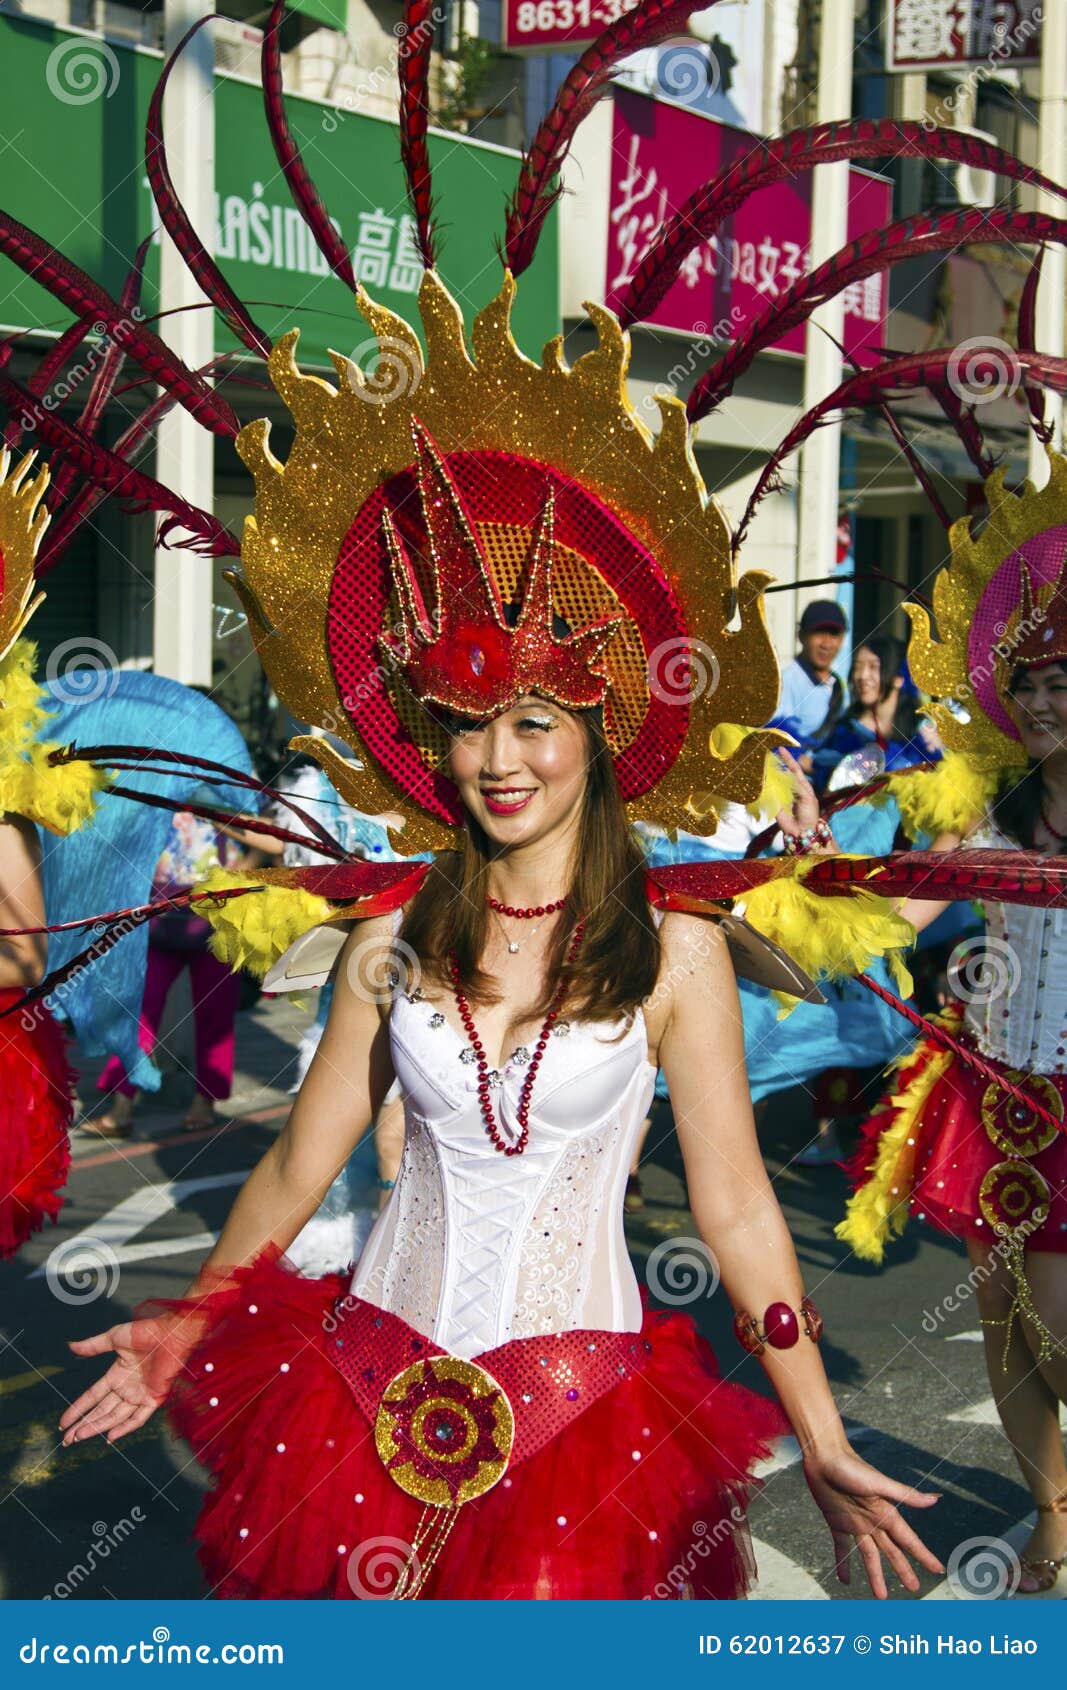 Tamsuitaiwancarnival Parade Editorial Photography Image Of Exotic